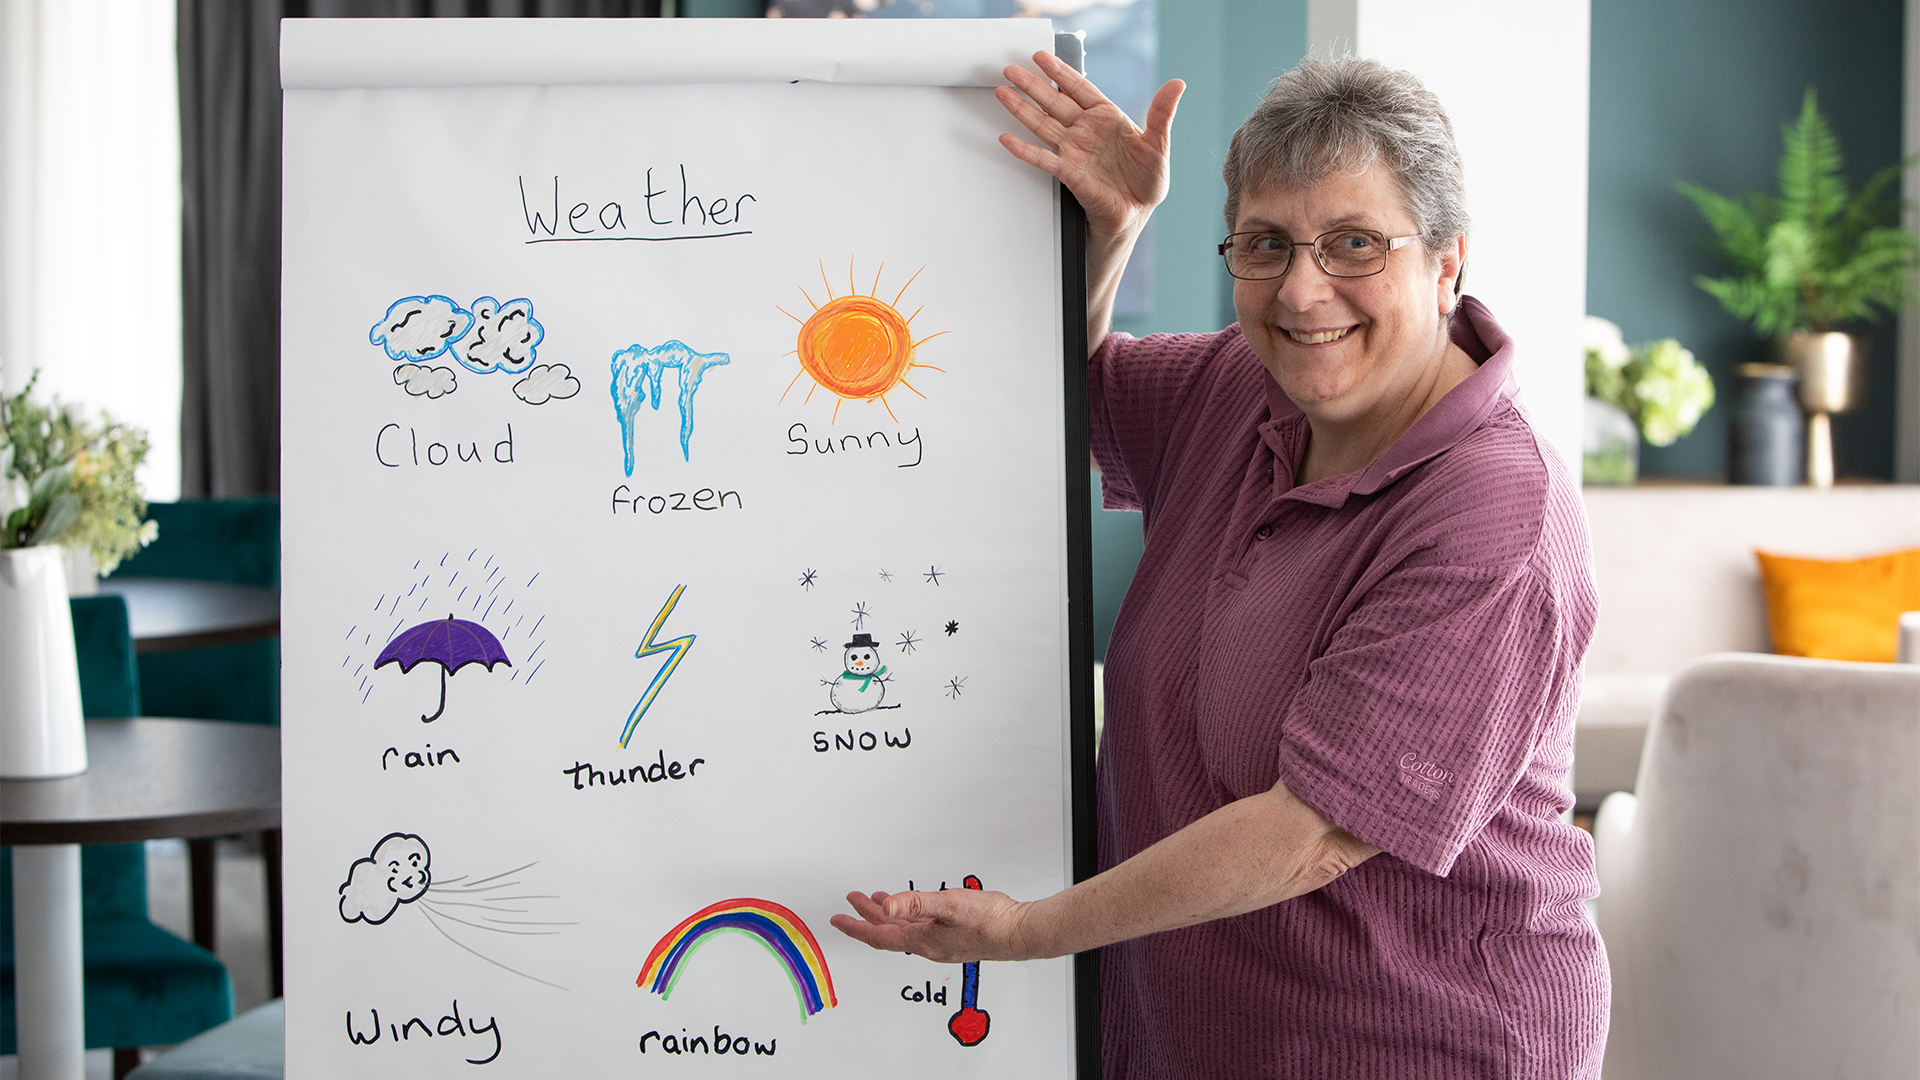 A photograph of customer Linda teaching a sign language class about the weather for residents of one of our retirement living communities. Linda has drawn symbols for weather conditions on a flip chart, and is gesturing towards the symbols with a smile.